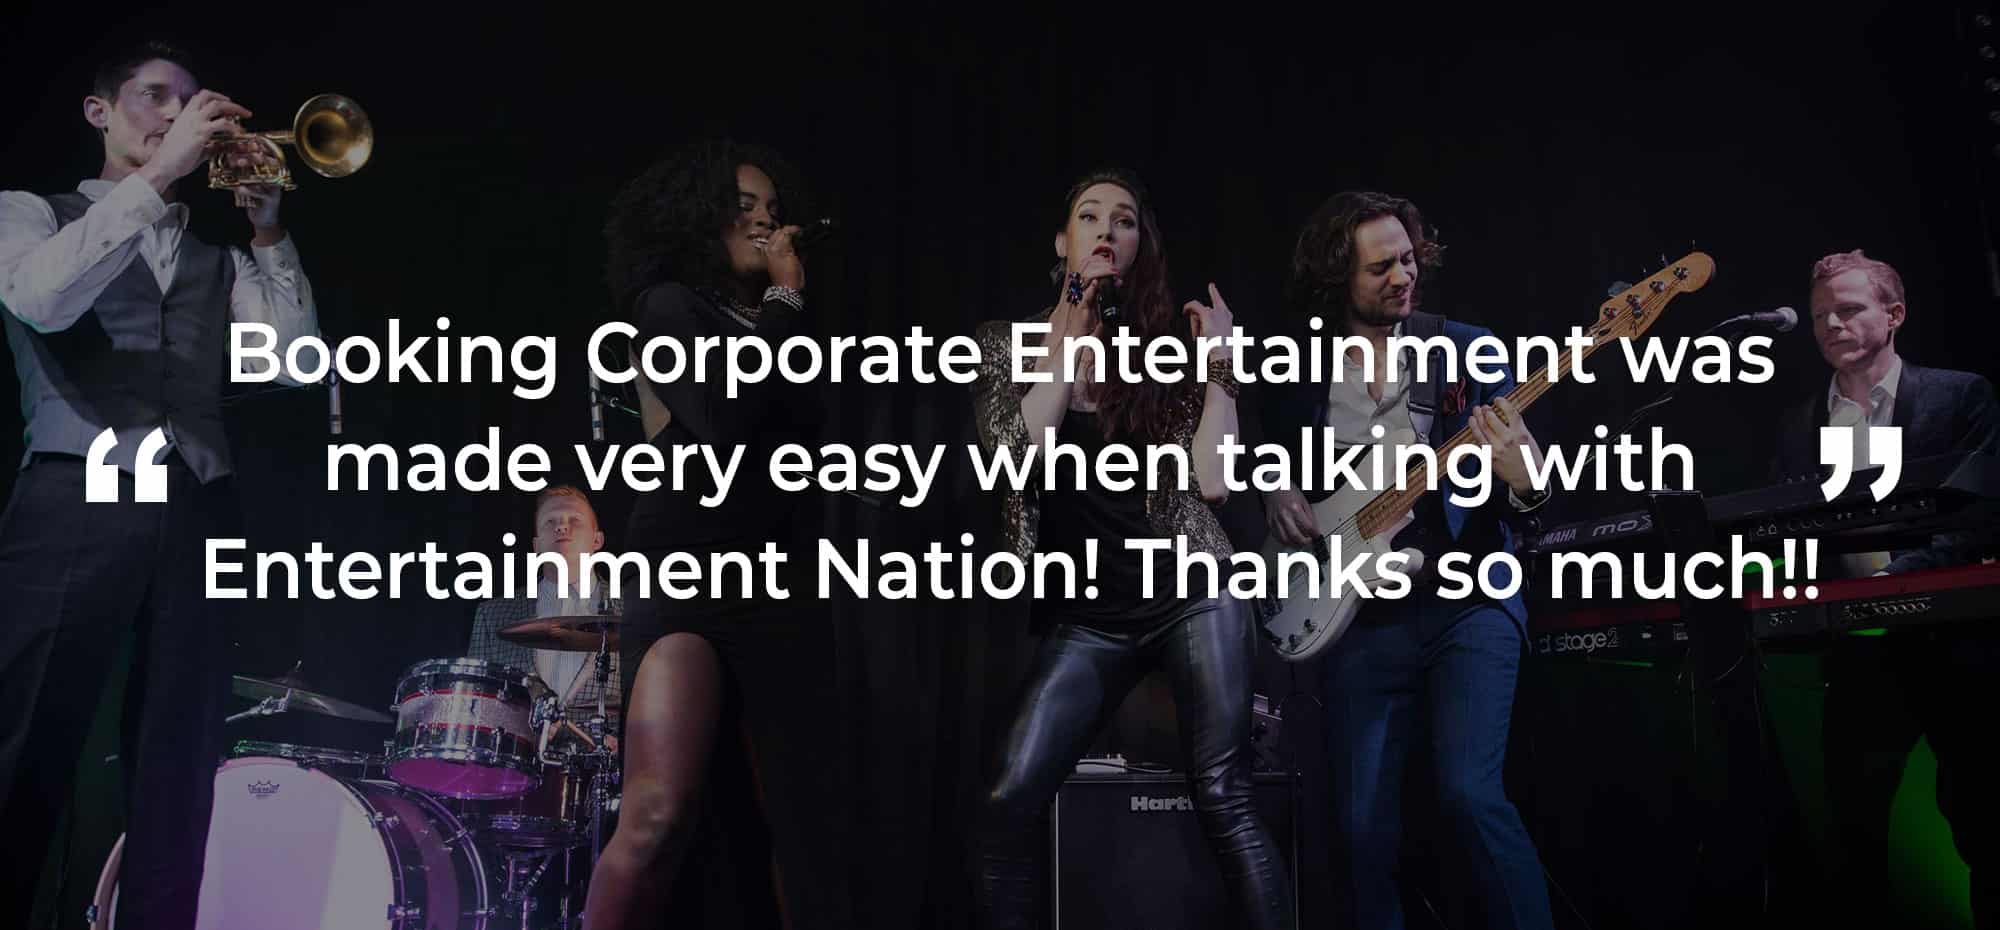 Client Review of Corporate Entertainment Greater London